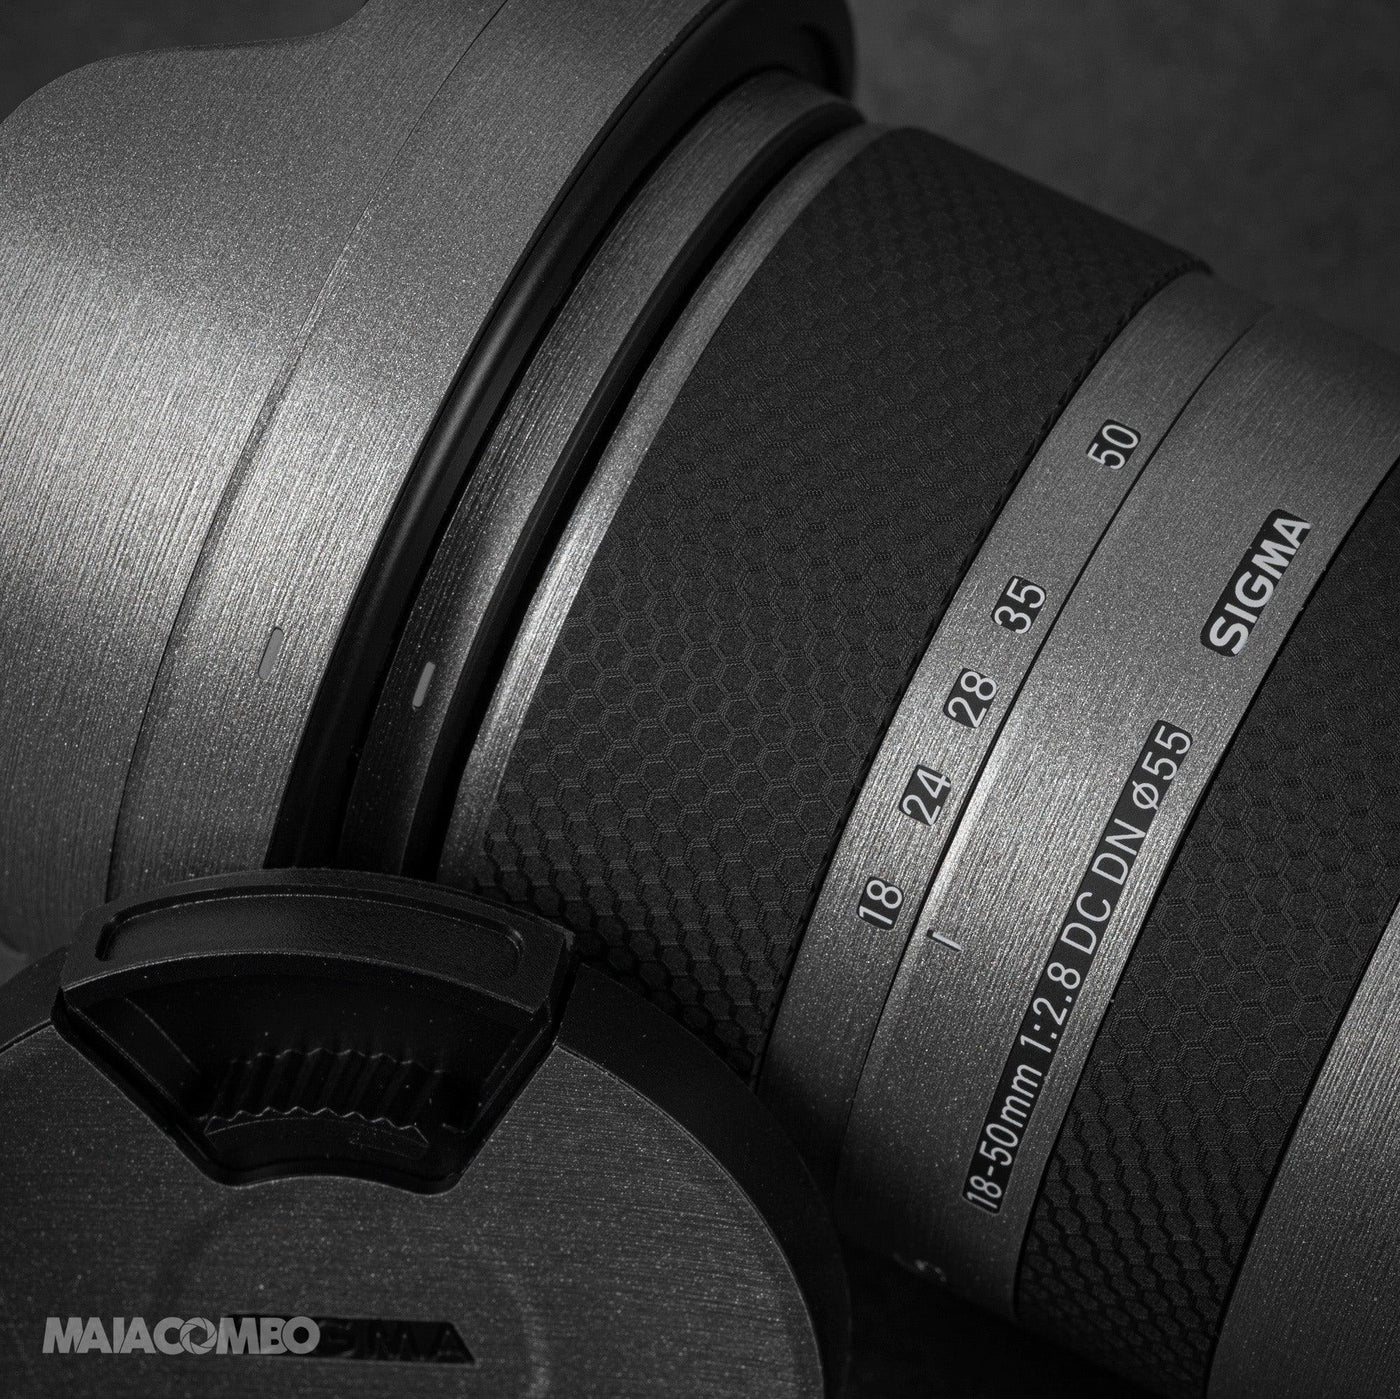 SIGMA 18-50mm F2.8 DC DN Lens Skin For SONY - MAIACOMBO